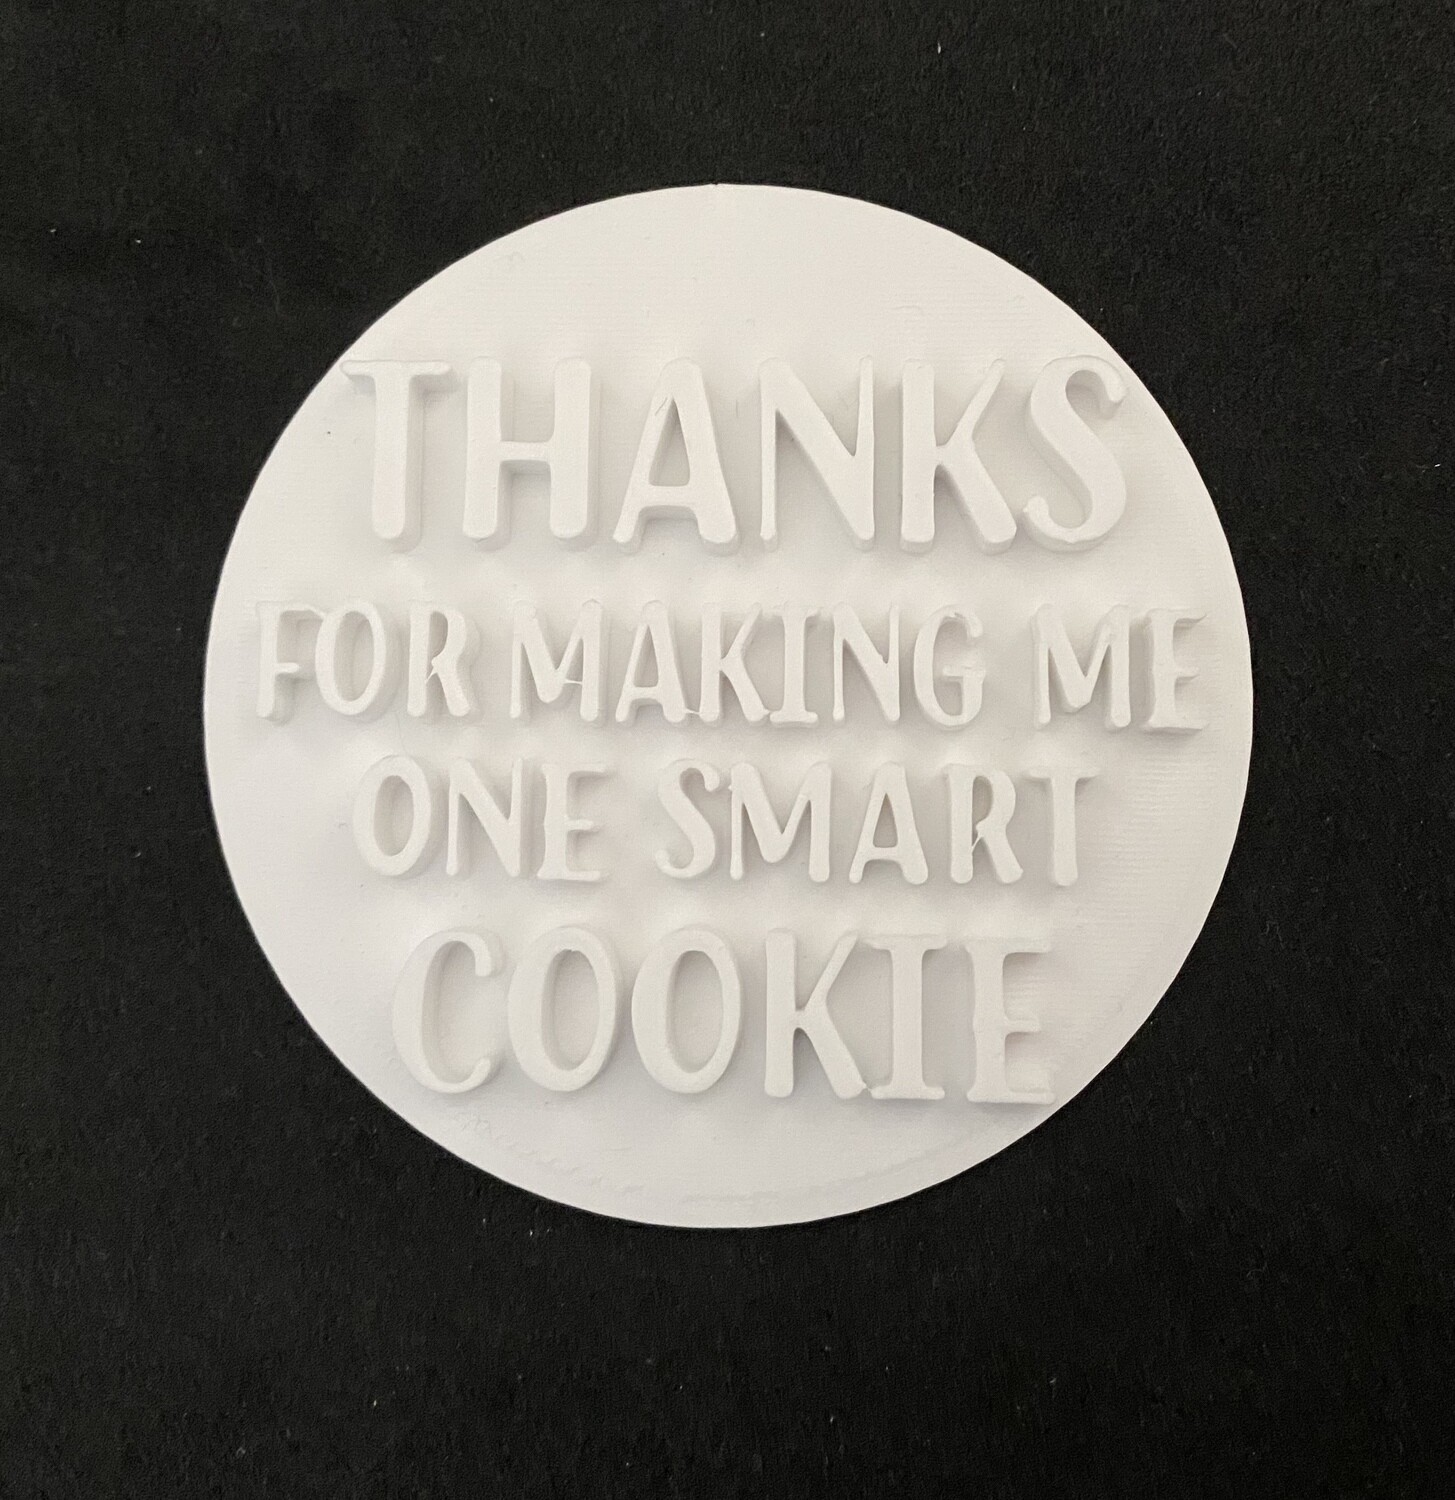 Thanks for making me one smart cookie - Stamp